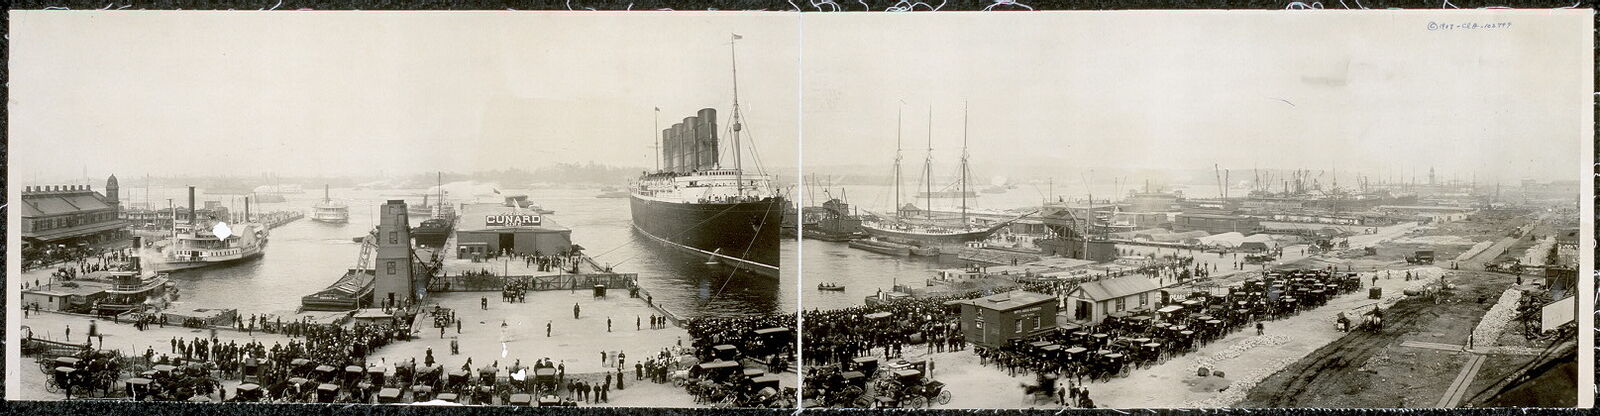 Photo:1907 Panoramic: The Lusitania at end of record voyage